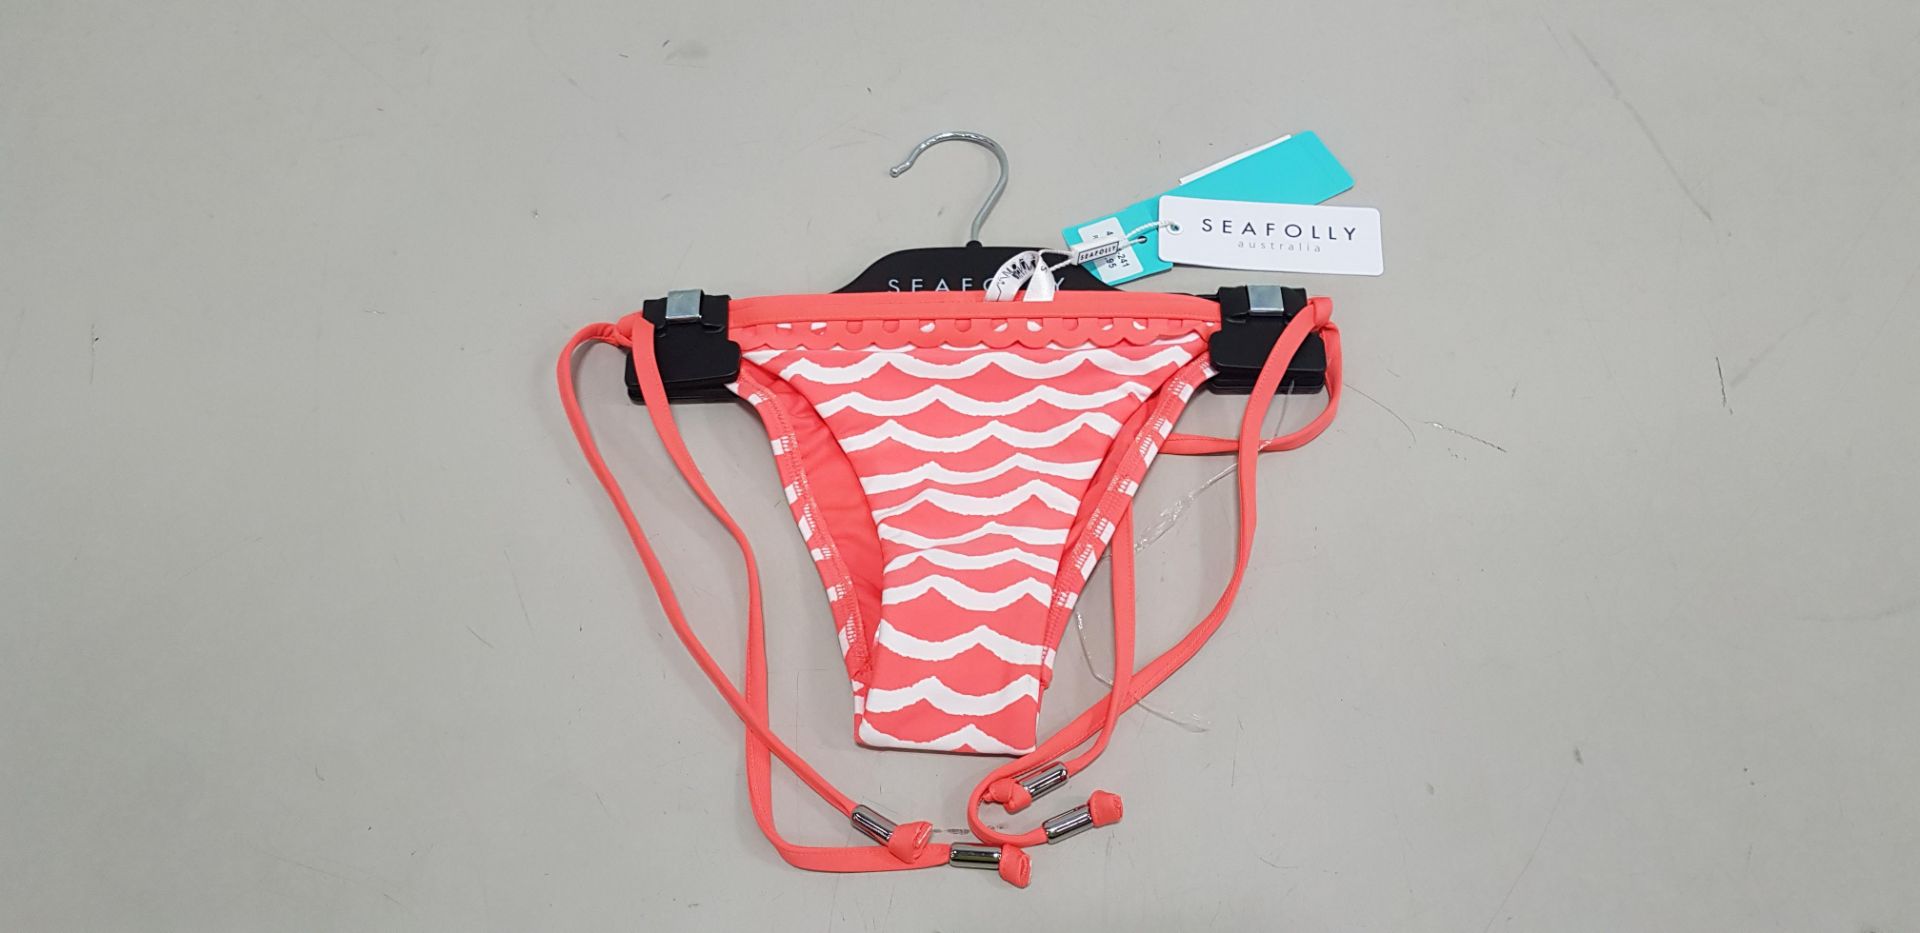 30 X BRAND NEW SEA FOLLY WOMANS BRIEFS - SIZE UK 8